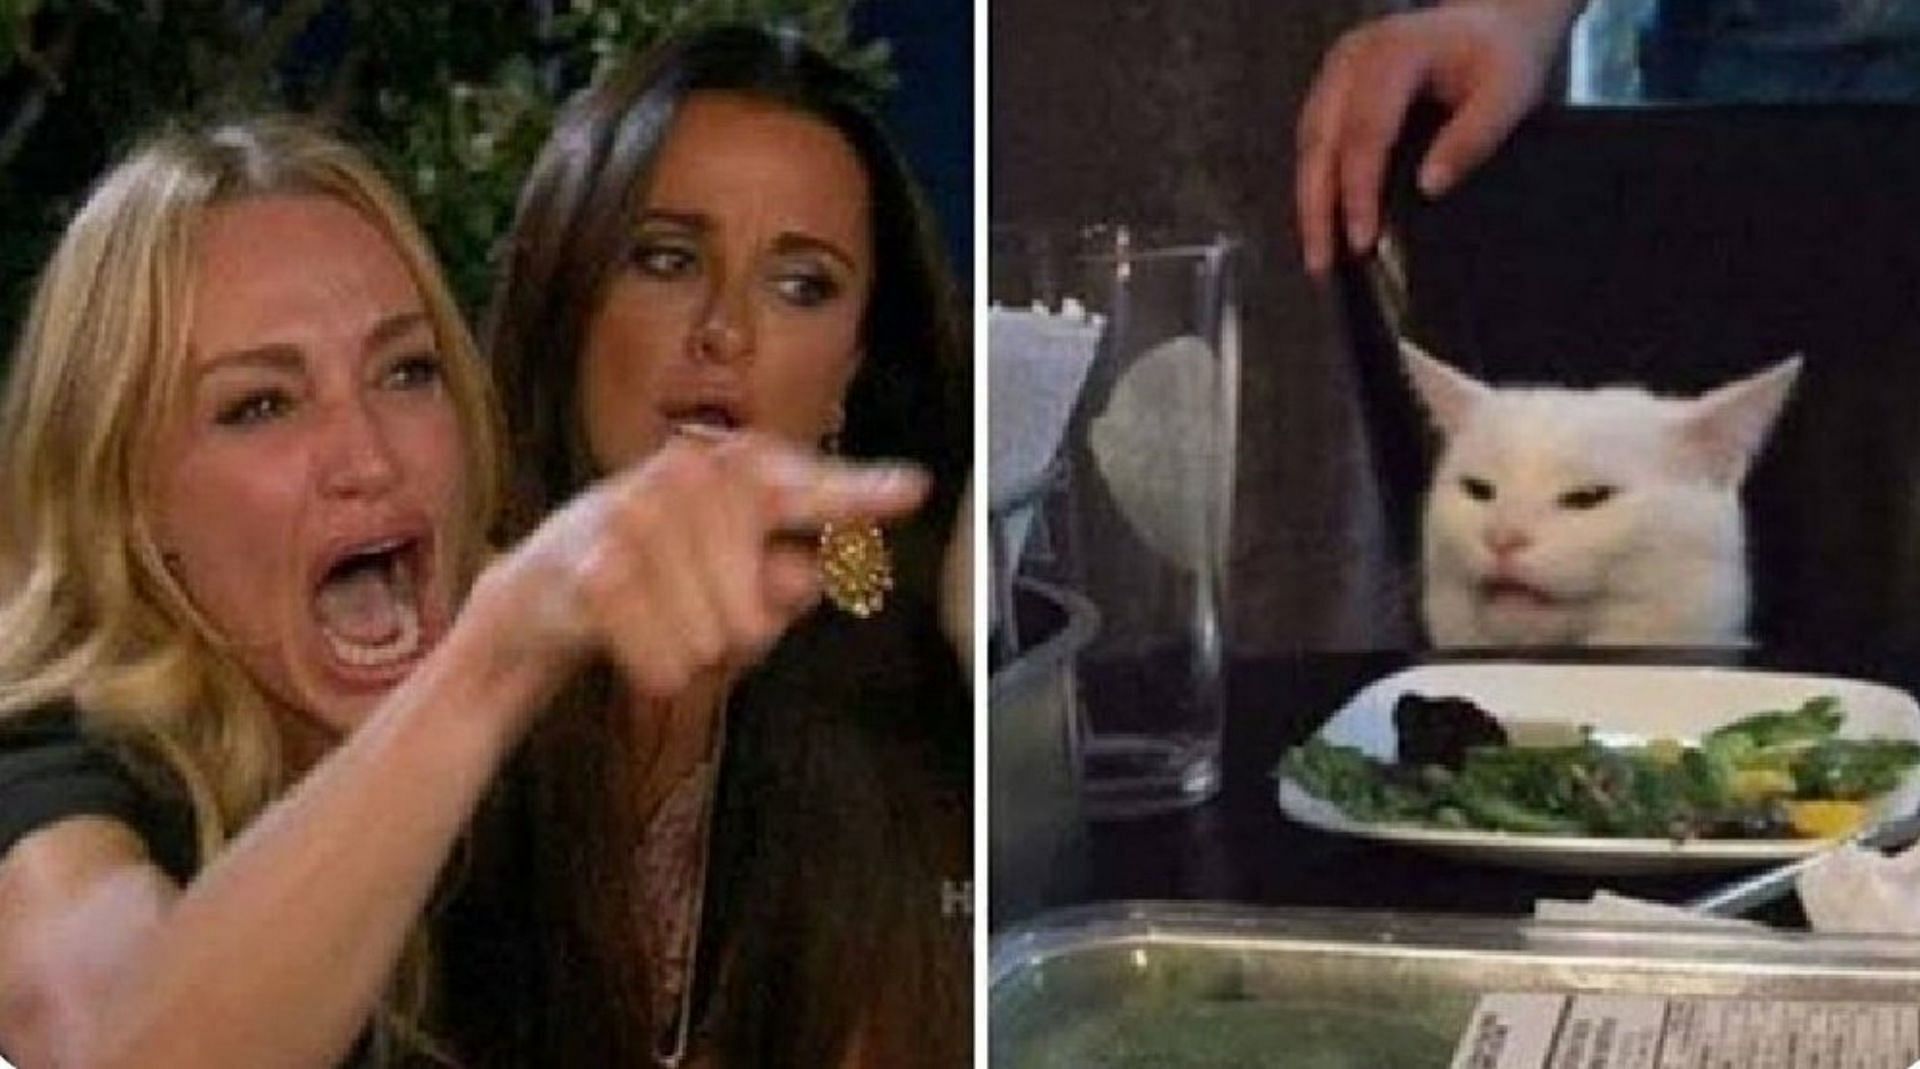 Woman Yelling at a Cat meme (Image via KnowYourMeme.com)